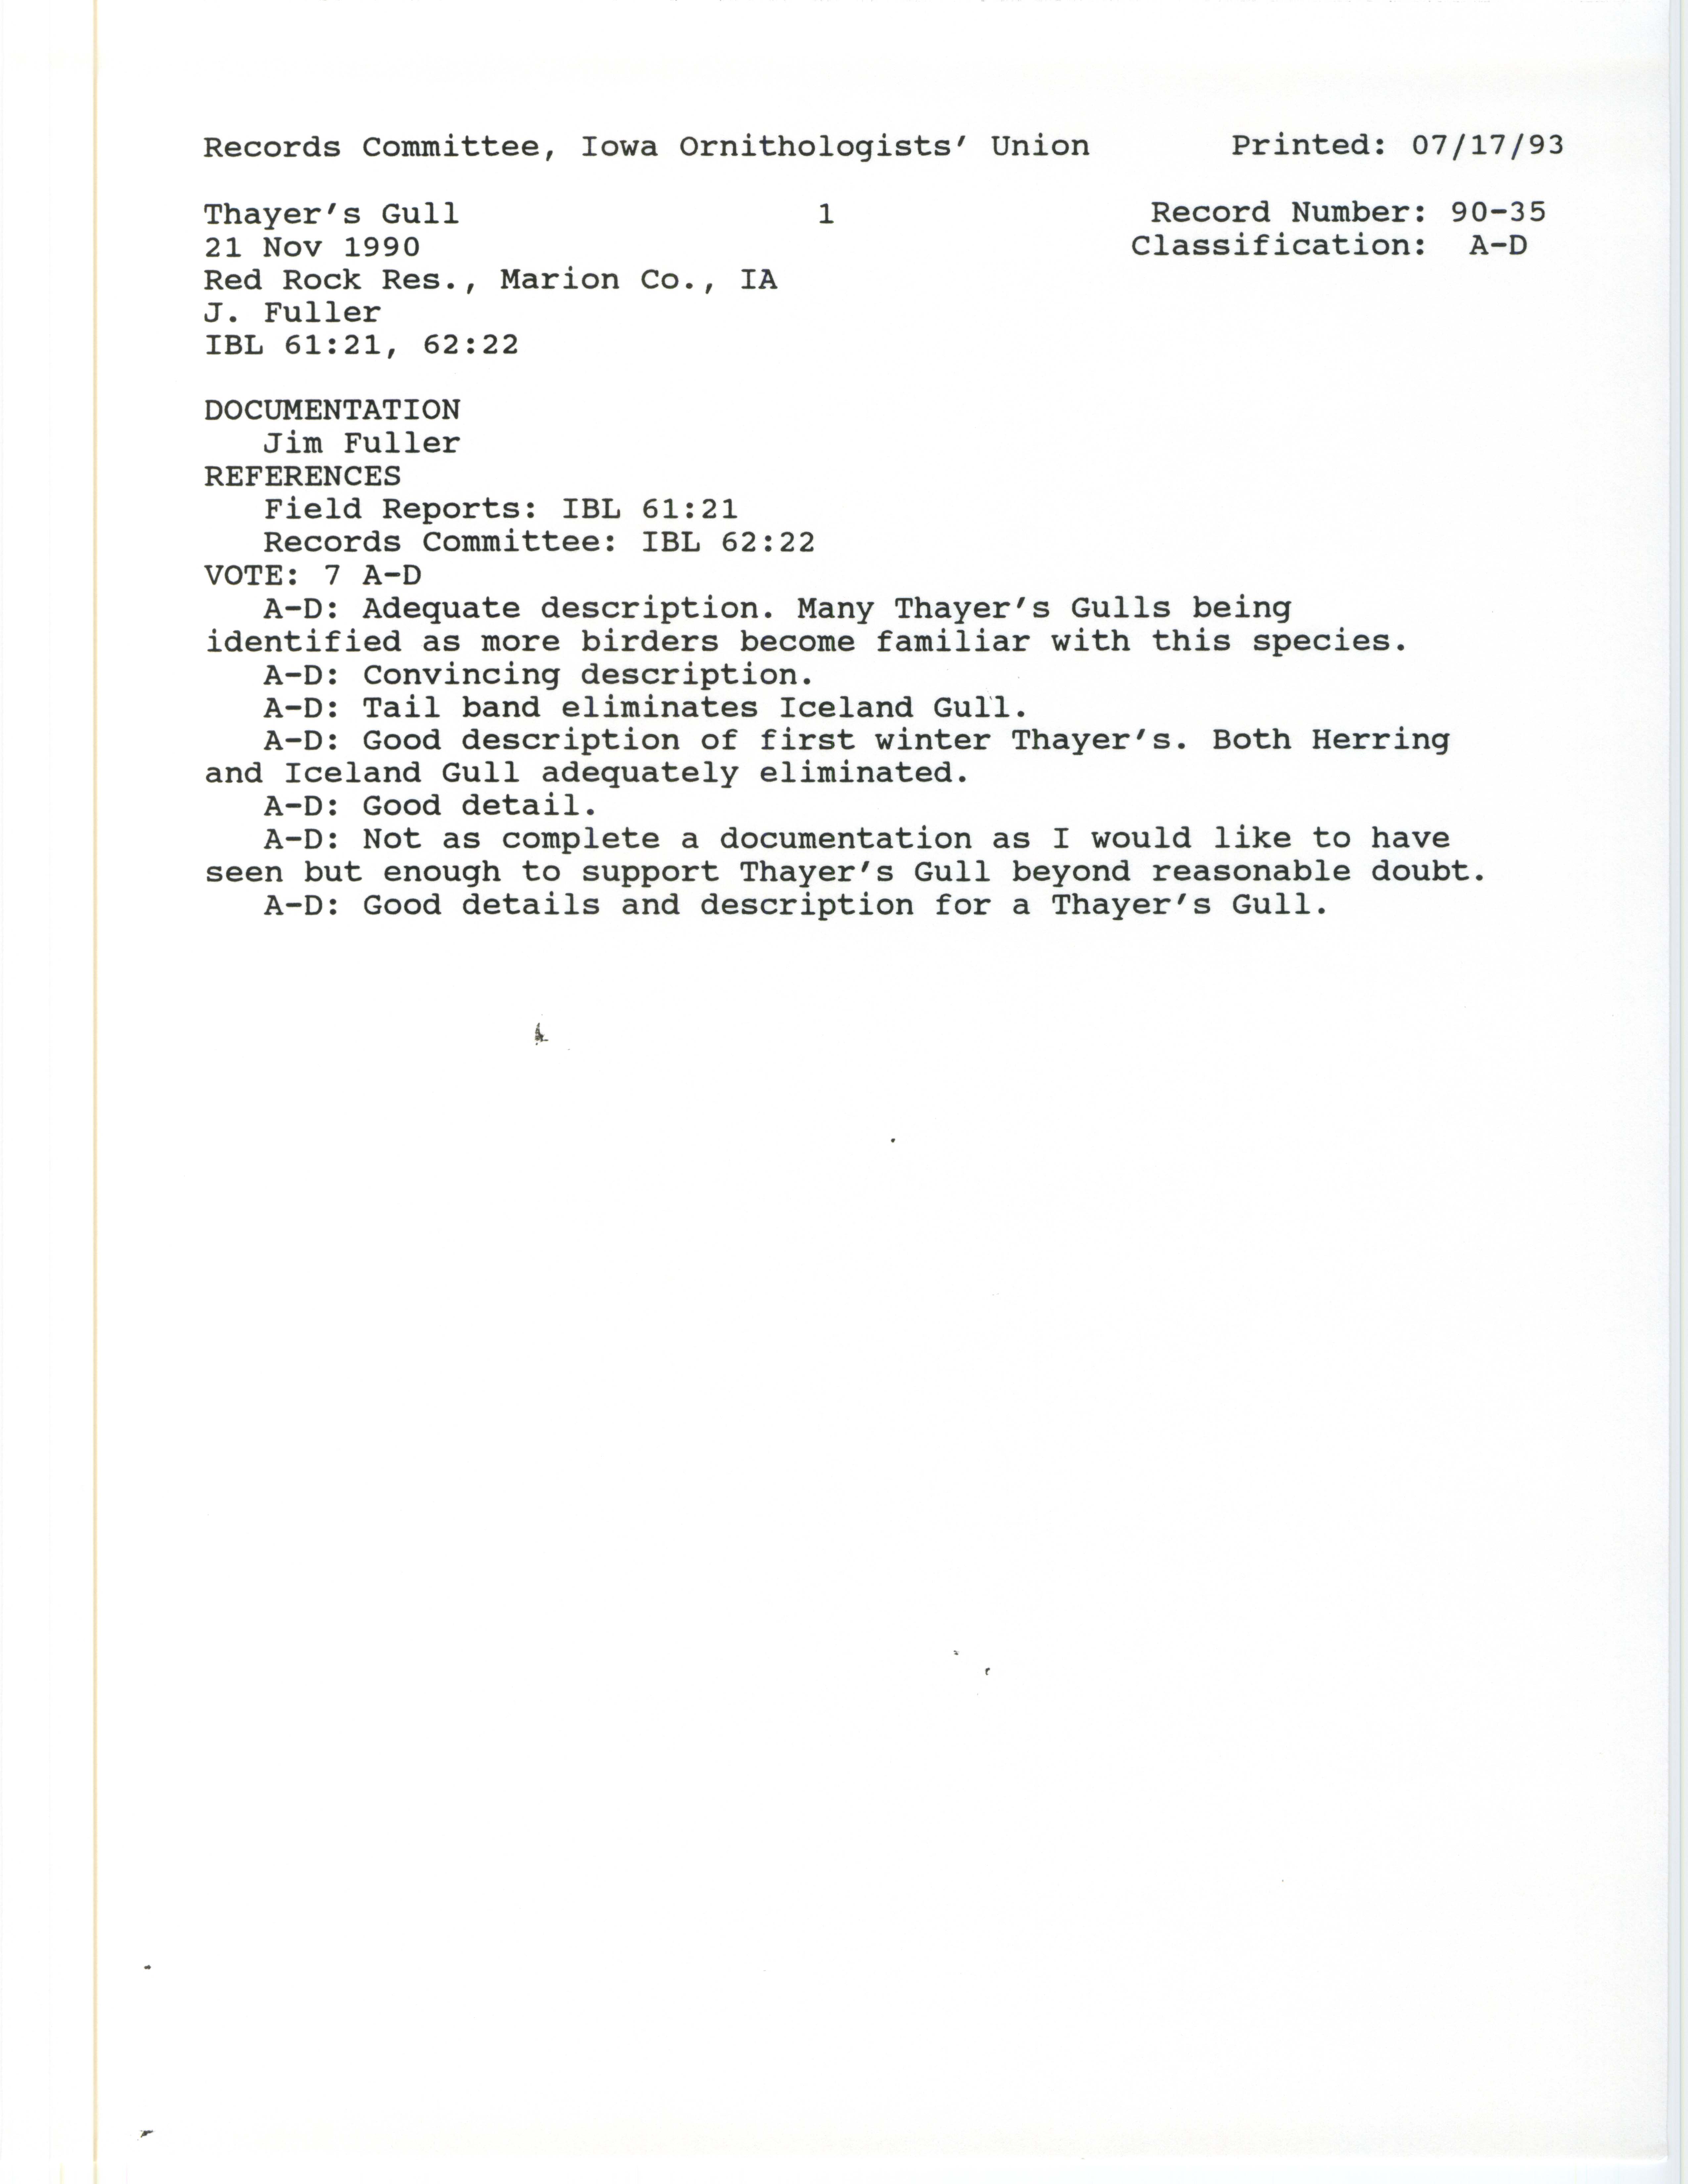 Records Committee review for rare bird sighting of Thayer's Gull at Red Rock Dam, 1990